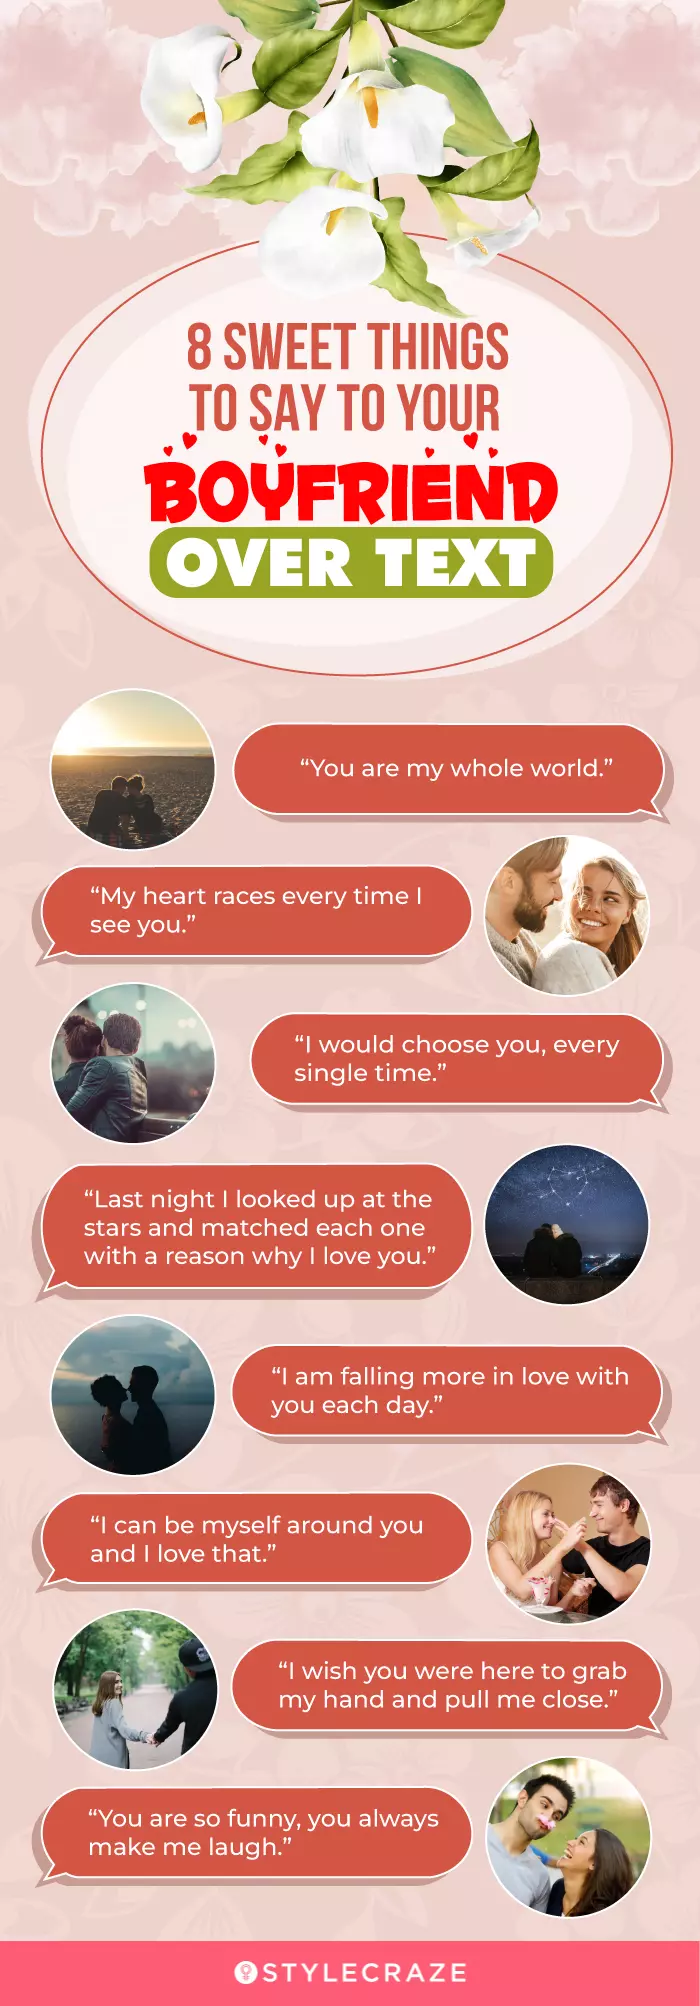 8 sweet things to say to your boyfriend over text (infographic)